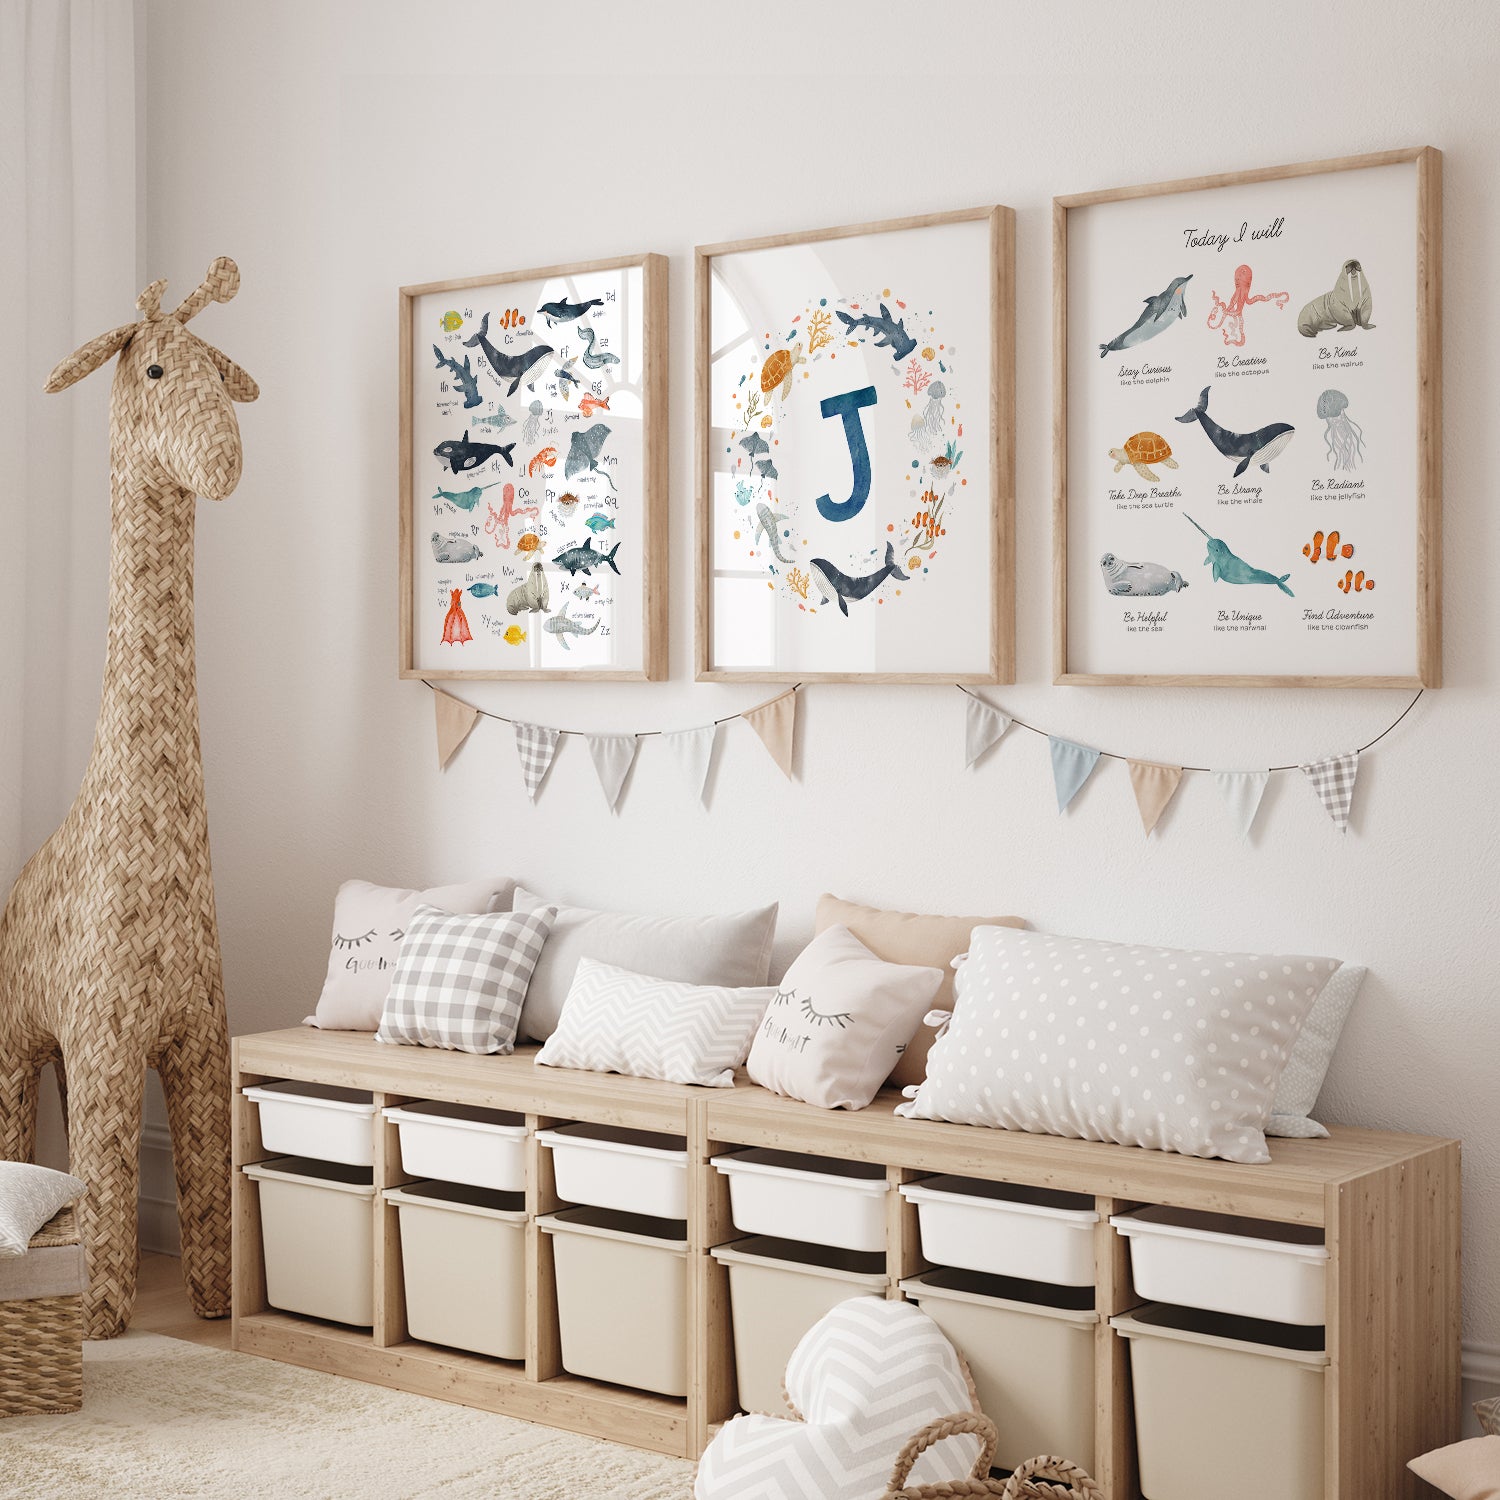 27 Nursery Theme Ideas to Inspire Your Decorating Journey